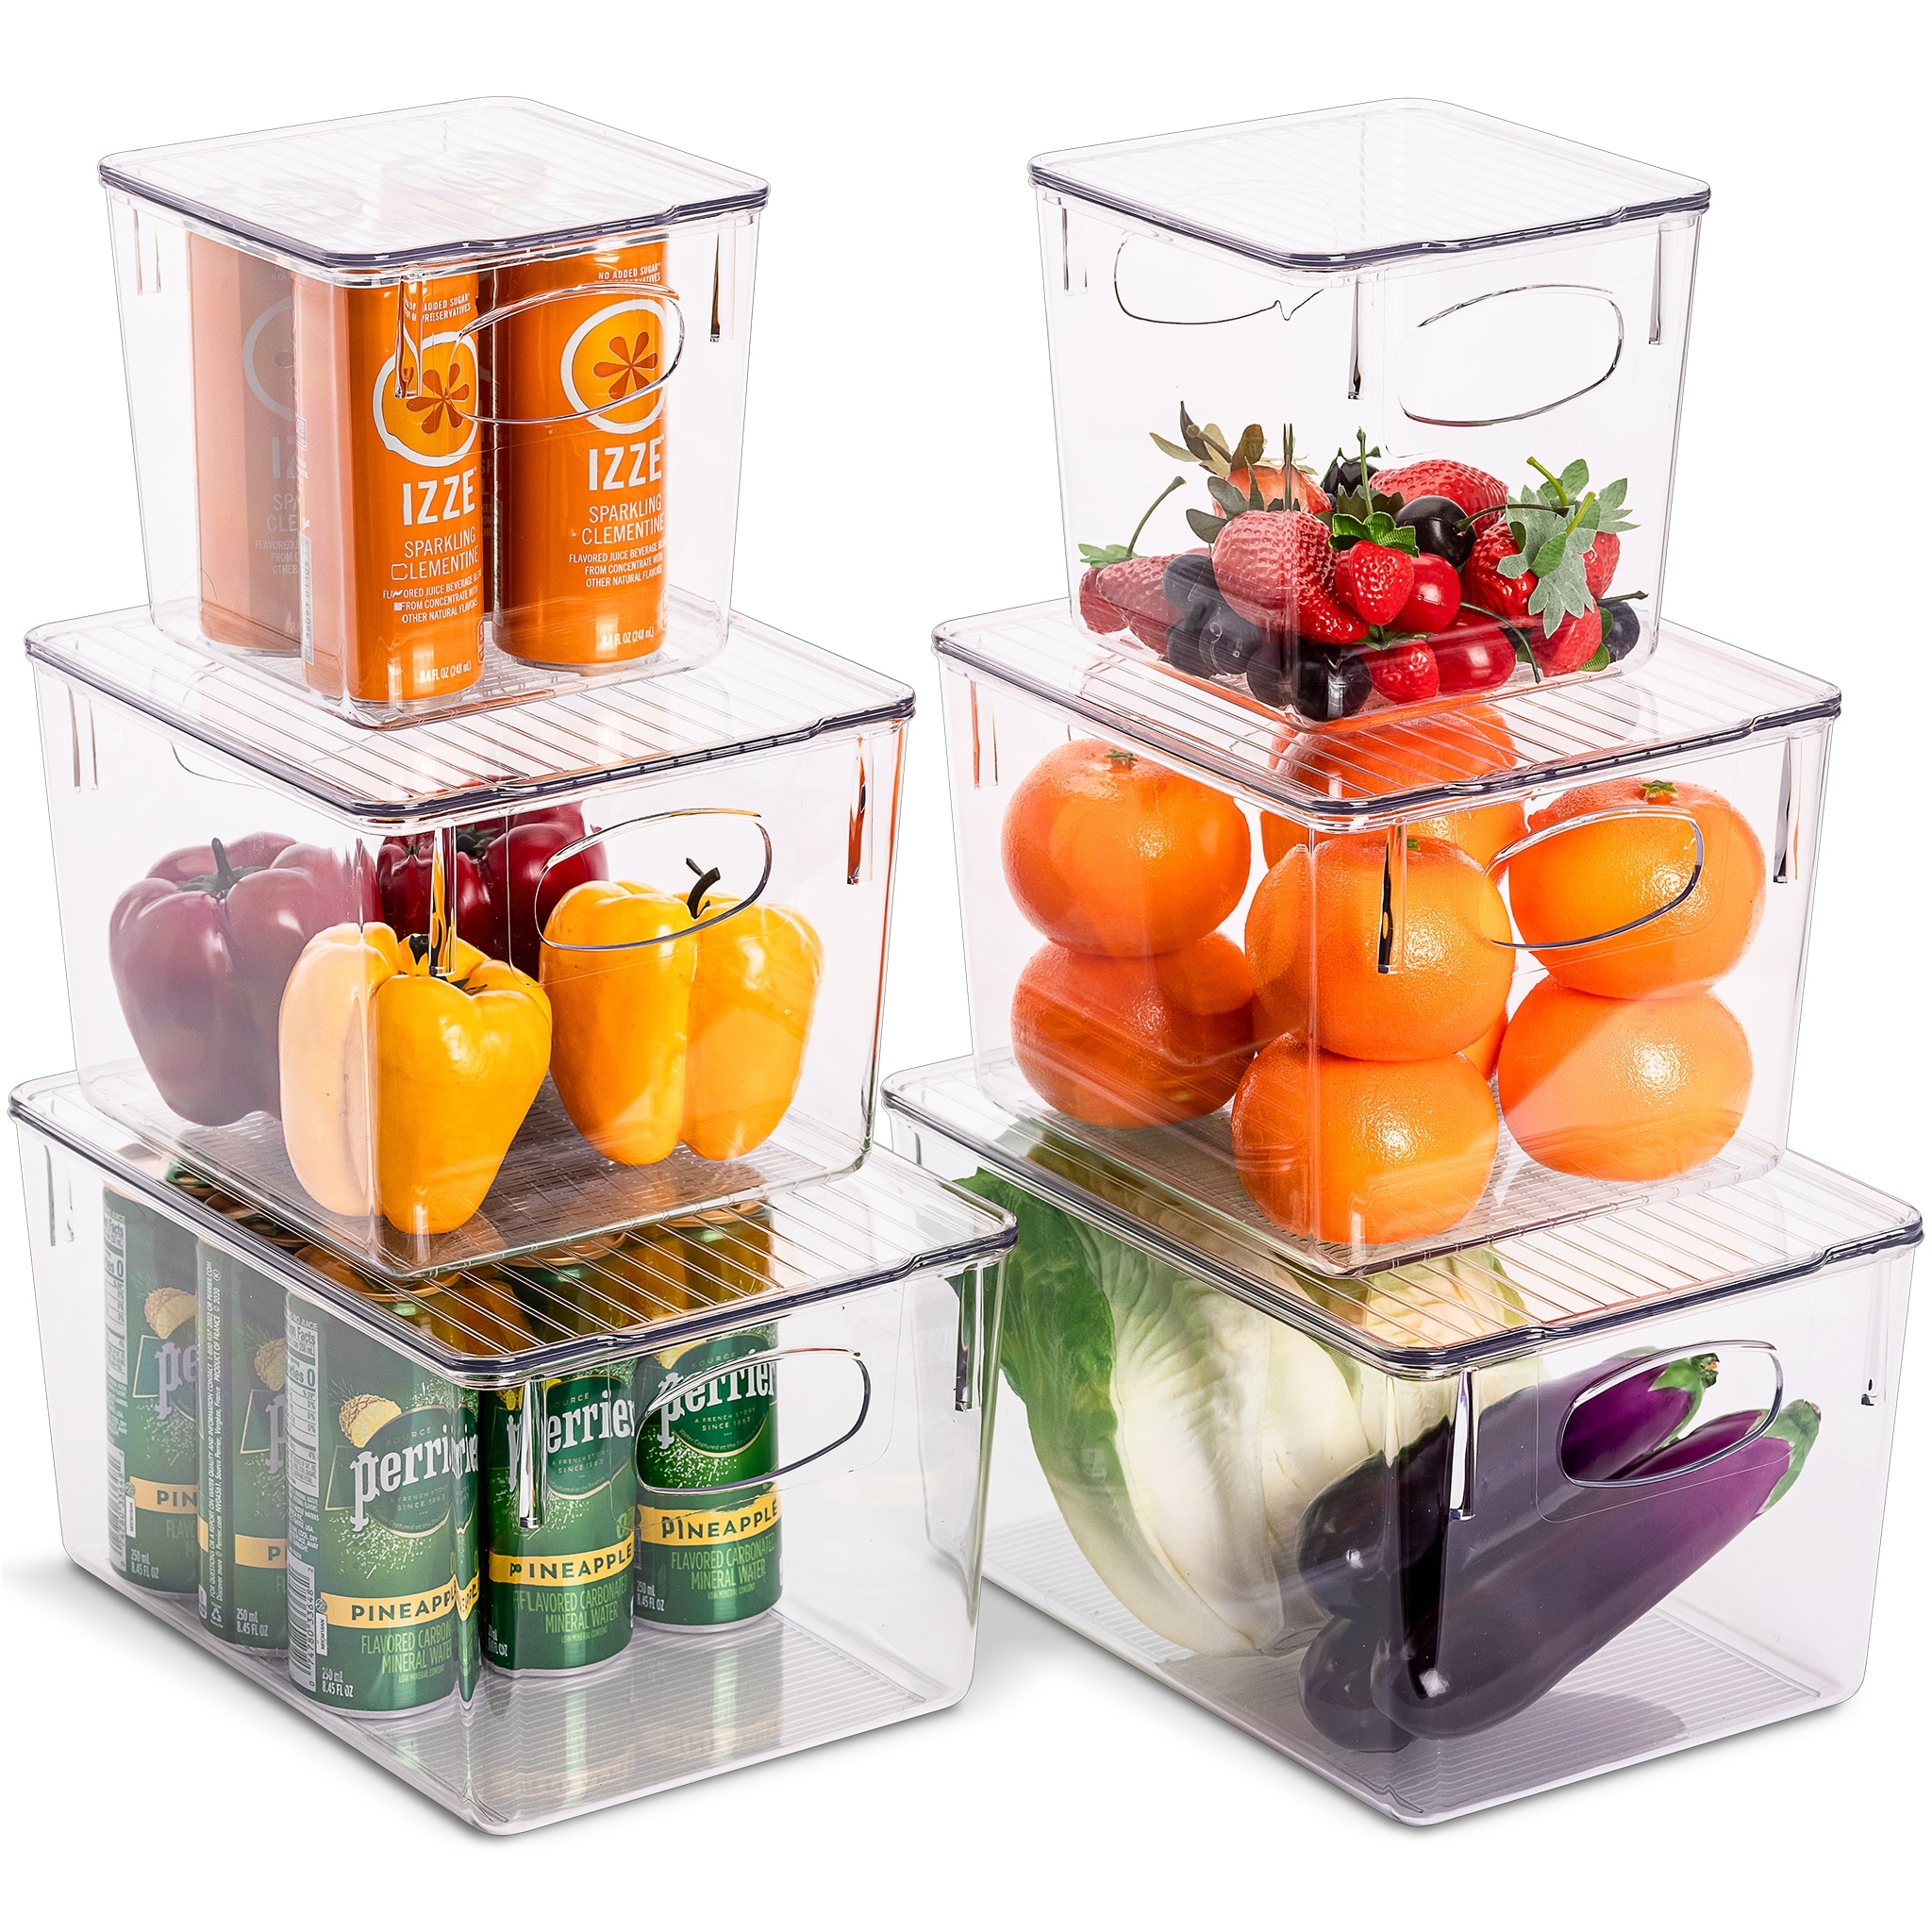 https://ak1.ostkcdn.com/images/products/is/images/direct/5dd28b074e37138ff8dca80312101d389272eea5/Organizer-Container-Bins%2C-Clear-Plastic-Bathroom-Storage-%286-pack%29.jpg